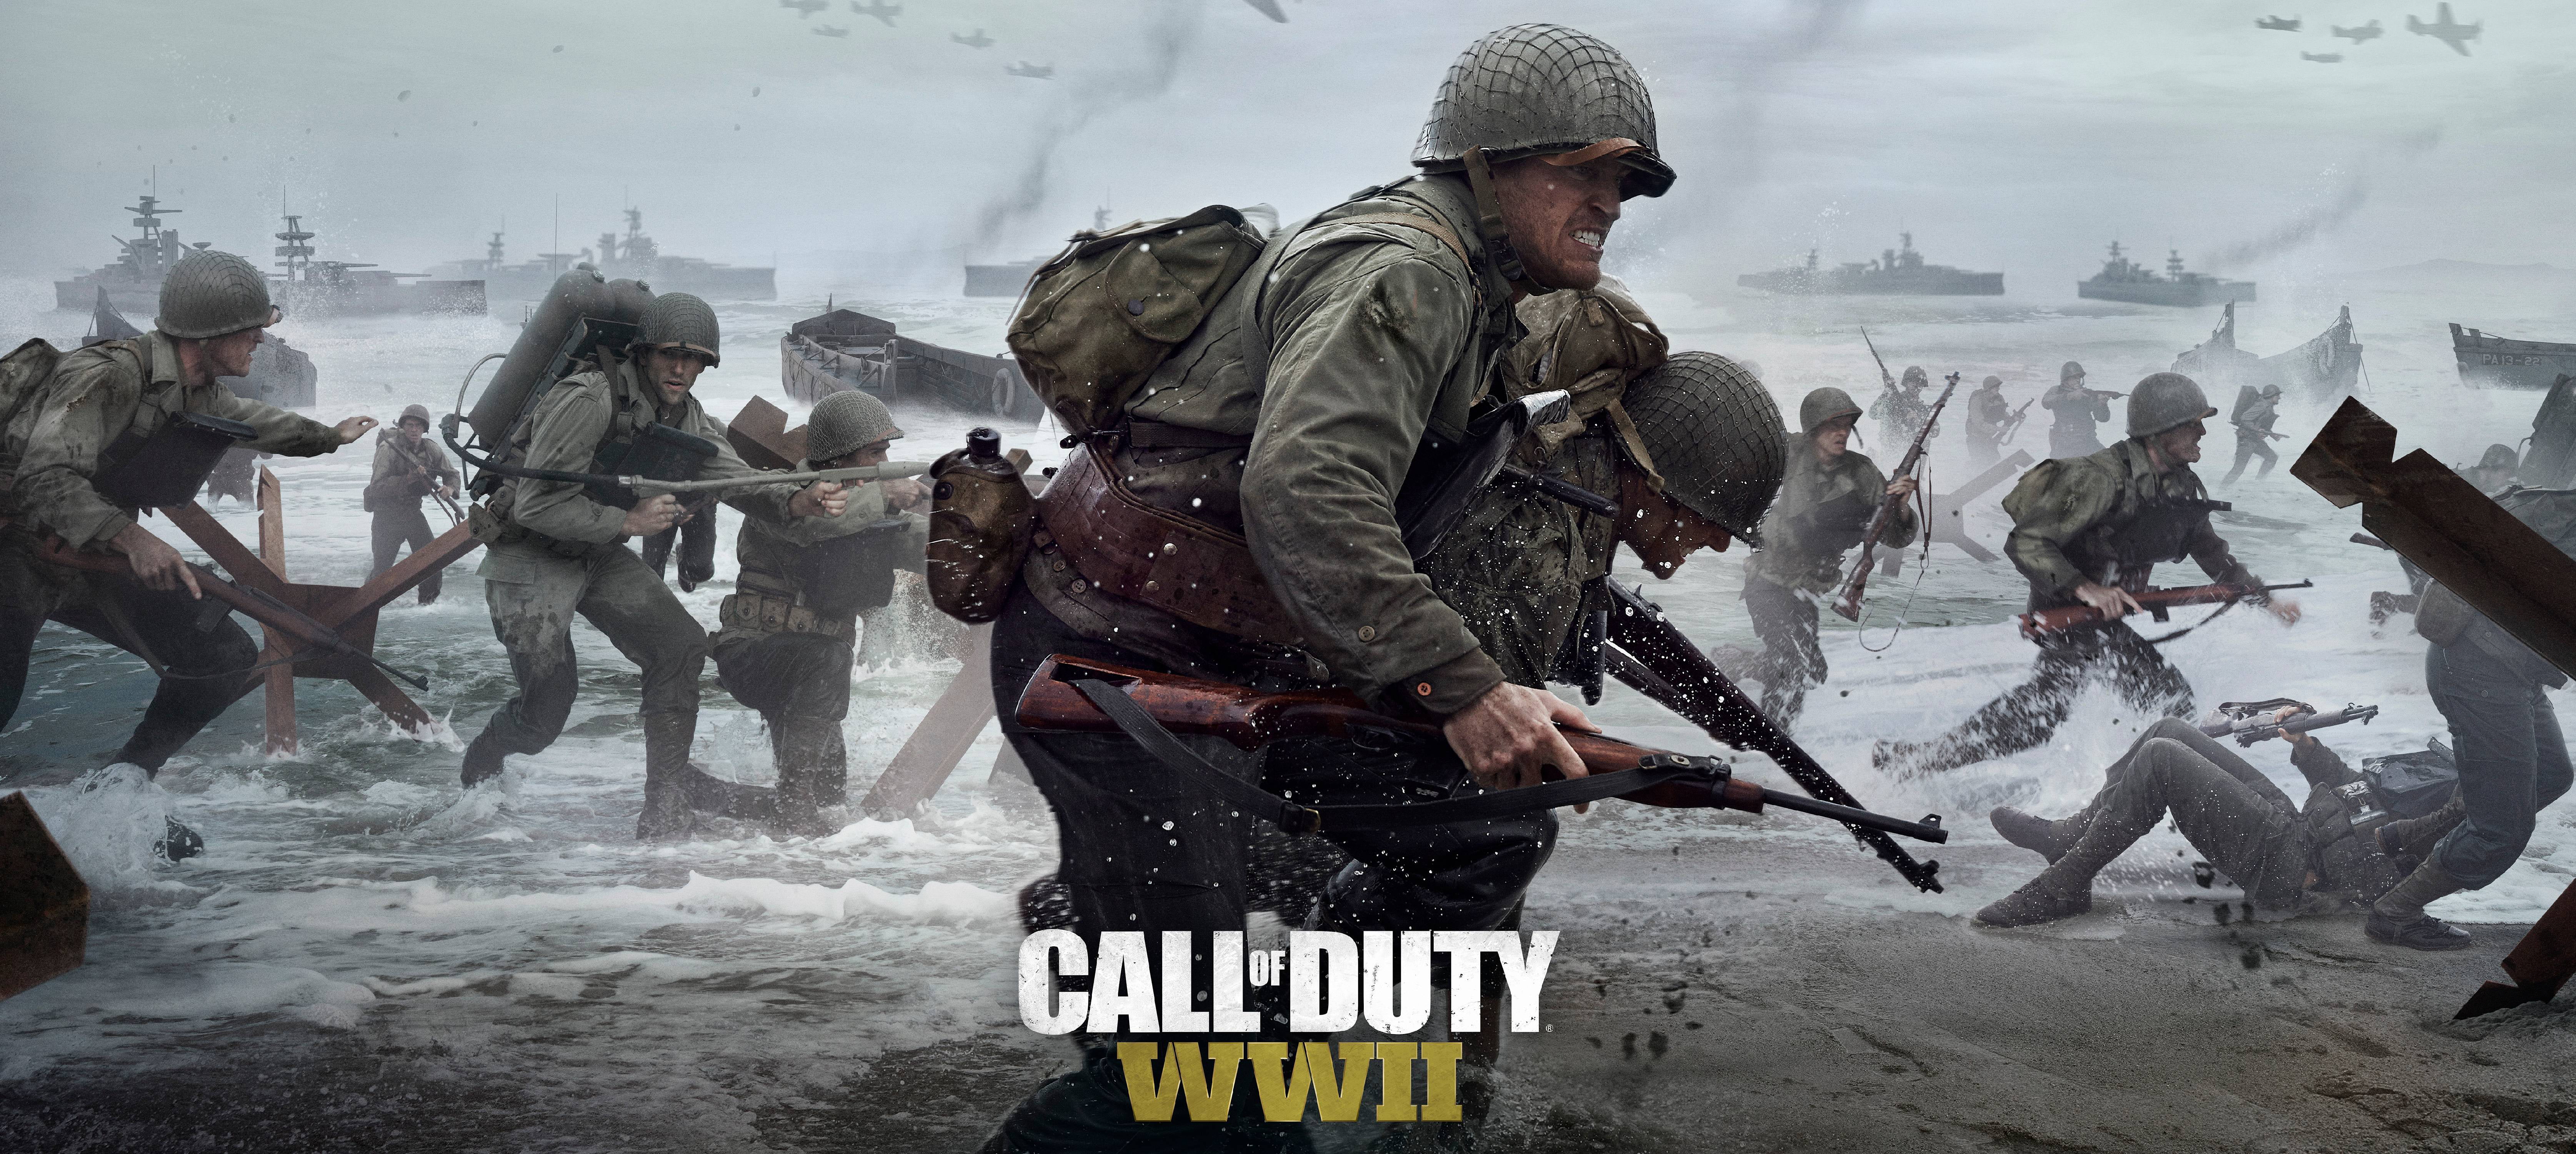 Call of Duty WWII Xbox One XB1 X WW2 World War 2 Activision Shooter - Brand  New! 47875881129